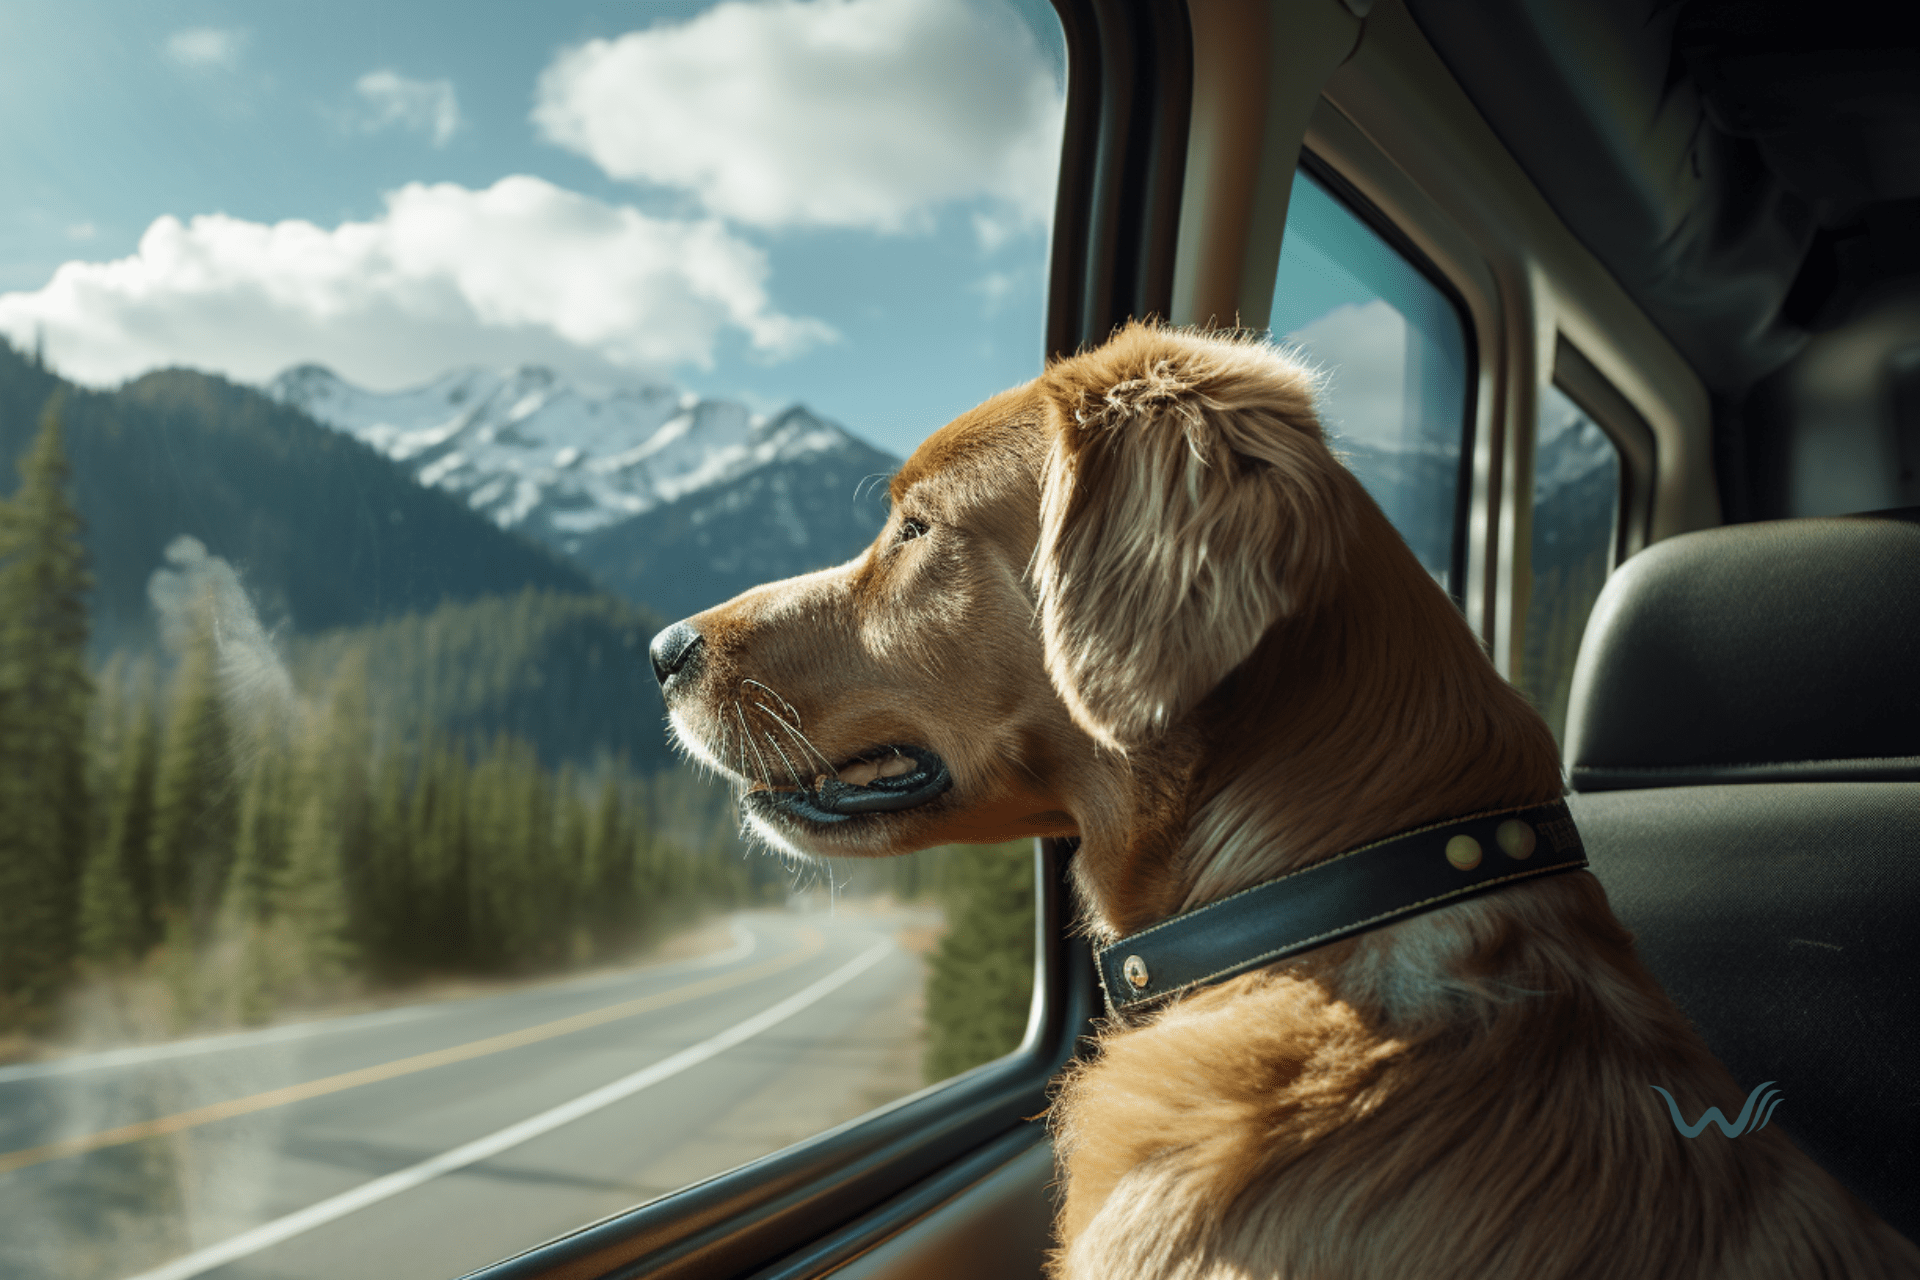 rv rentals & pet friendly adventures your guide to exploring with fido